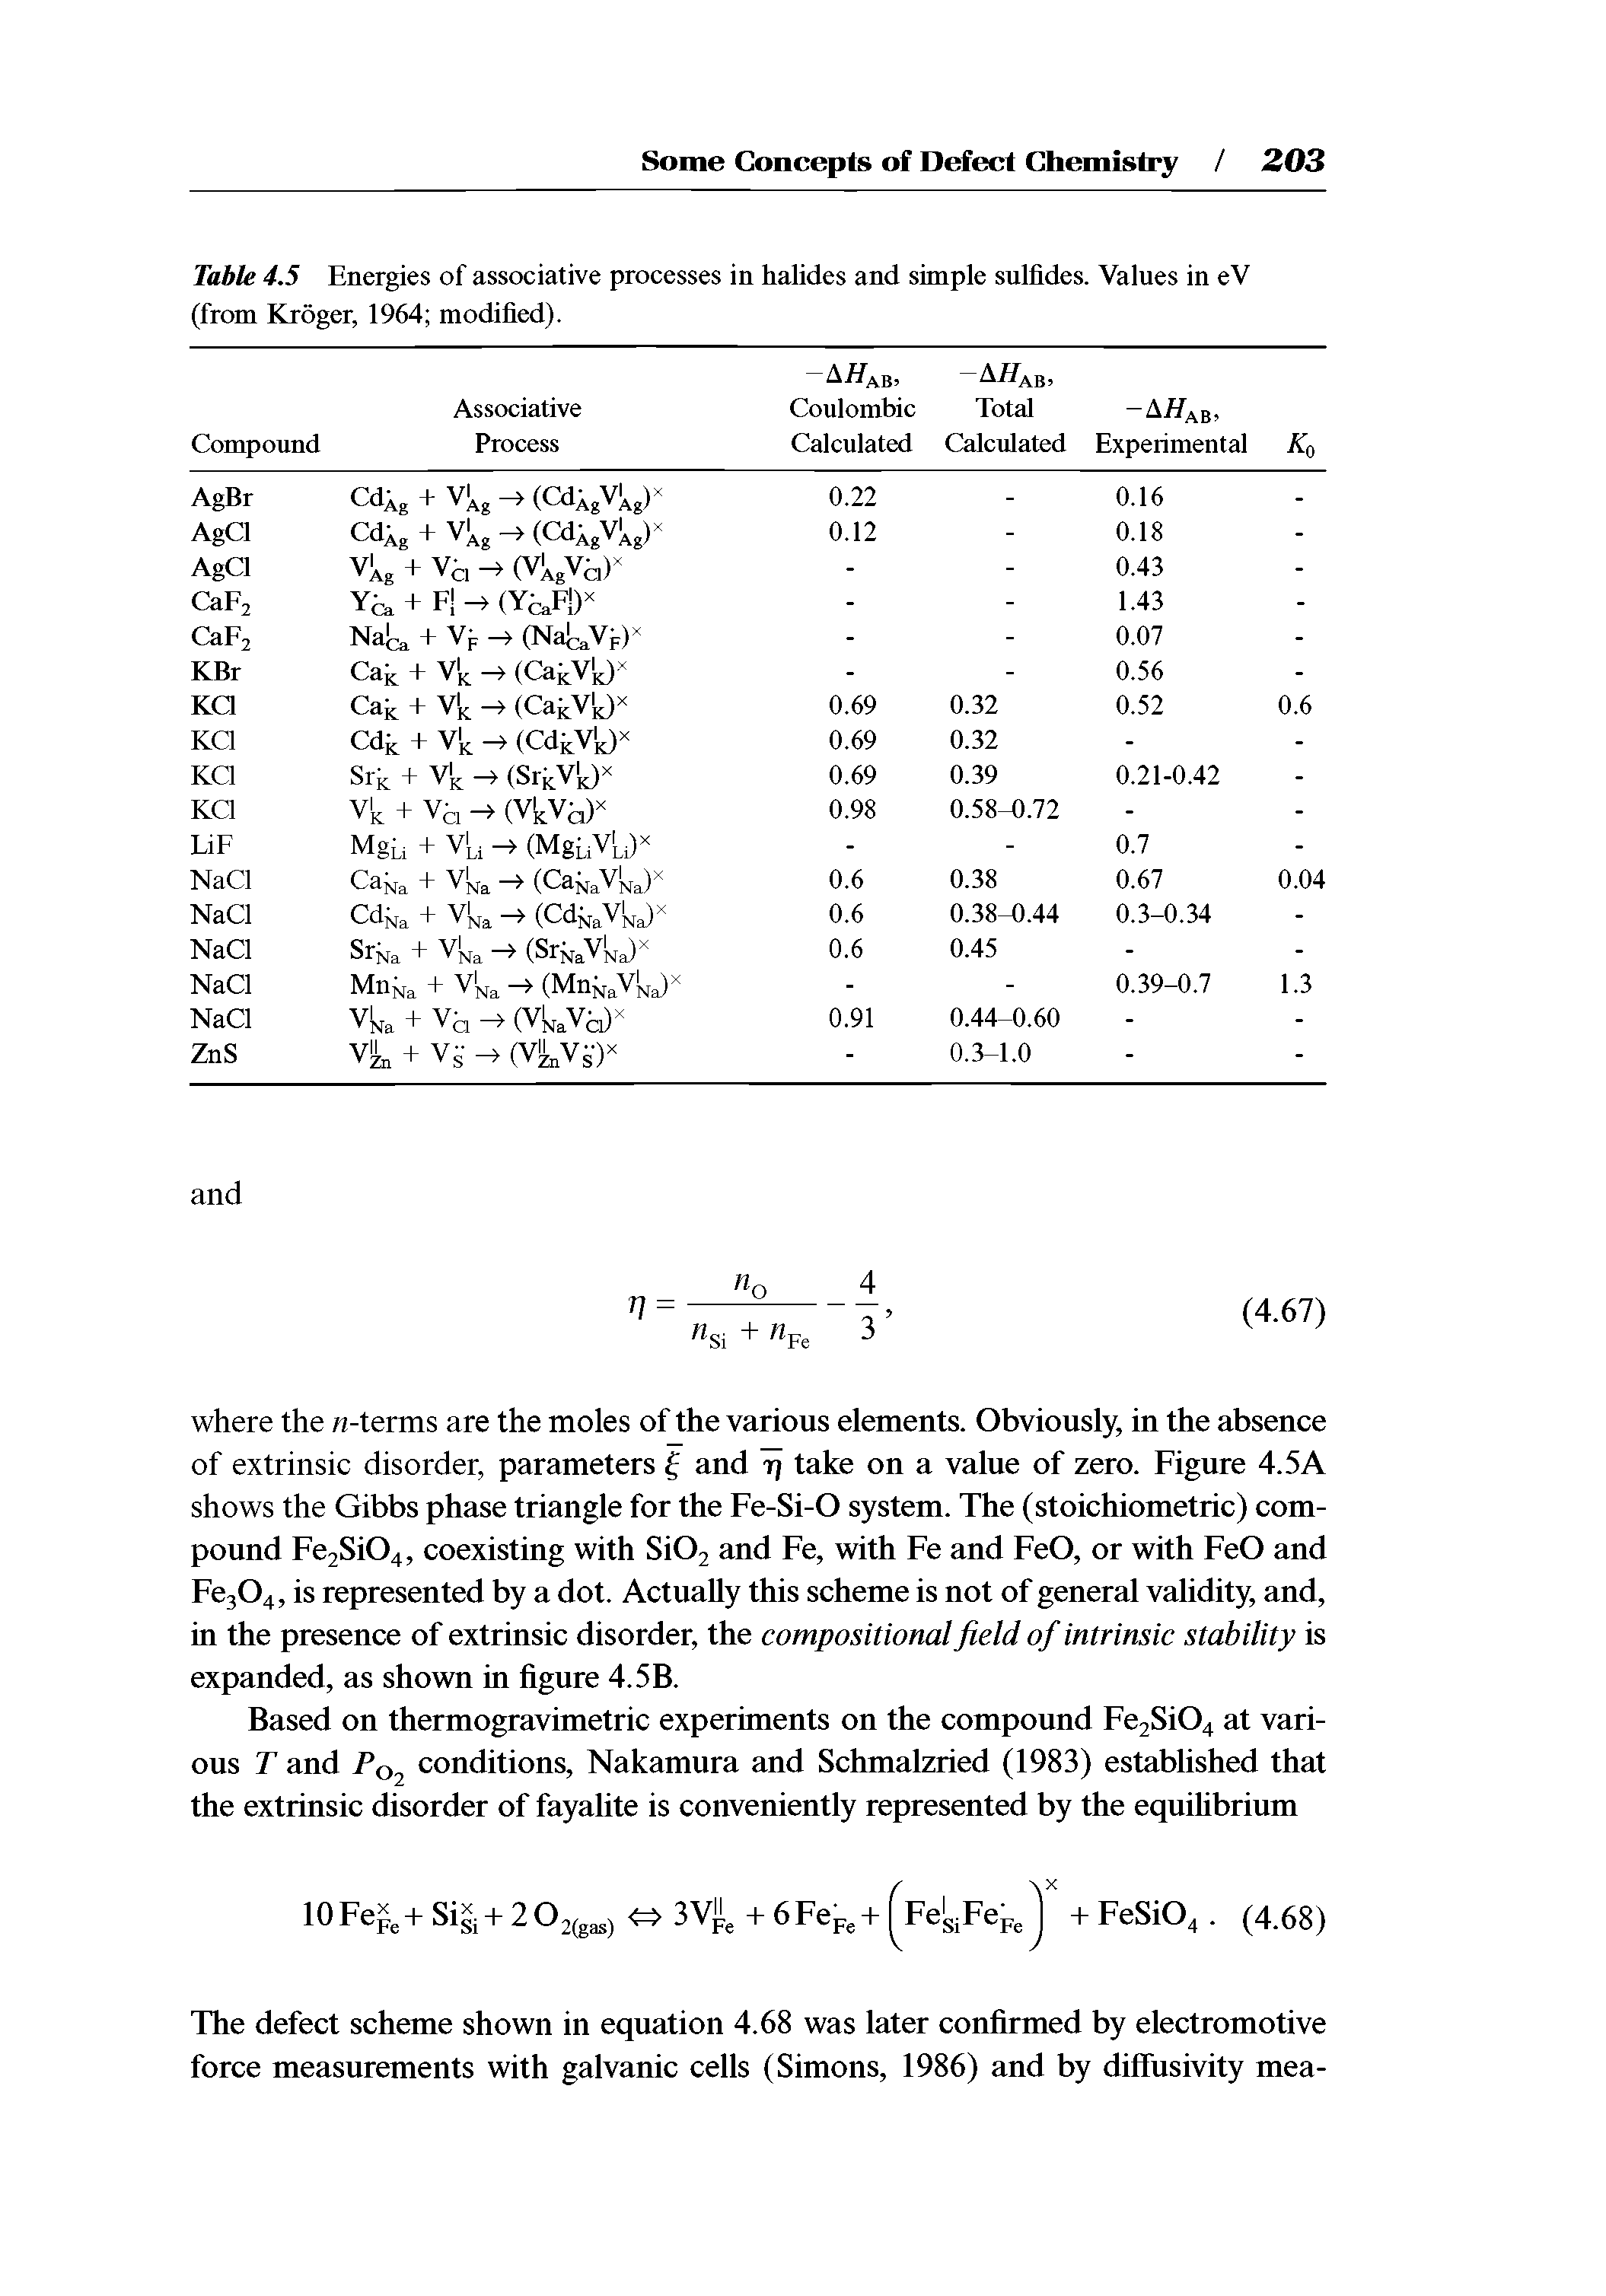 Table 4.5 Energies of associative processes in halides and simple snlfides. Values in eV (from Kroger, 1964 modified). ...